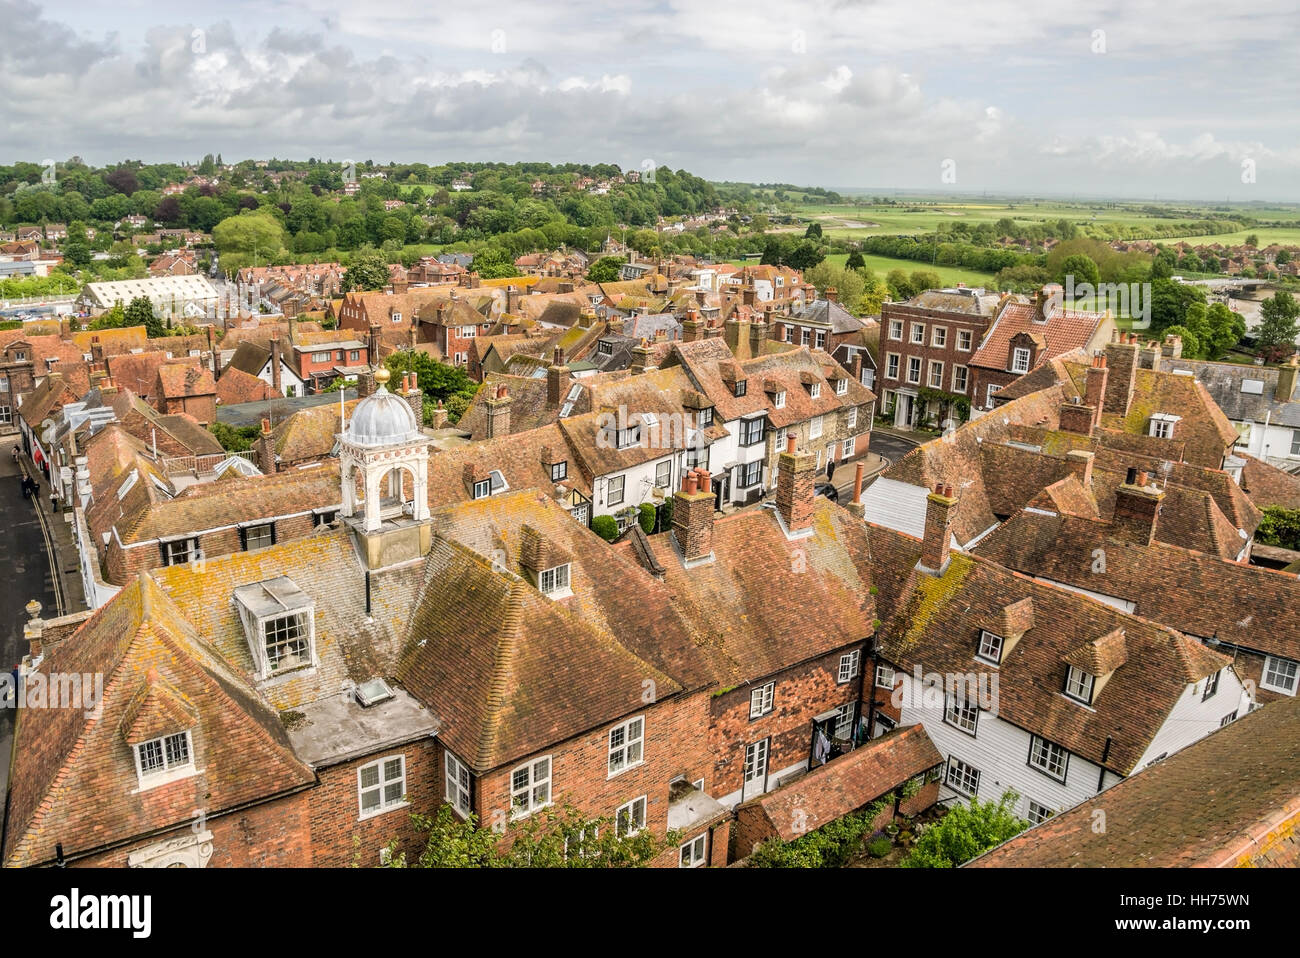 Historical town center of Rye, in East Sussex, England Stock Photo